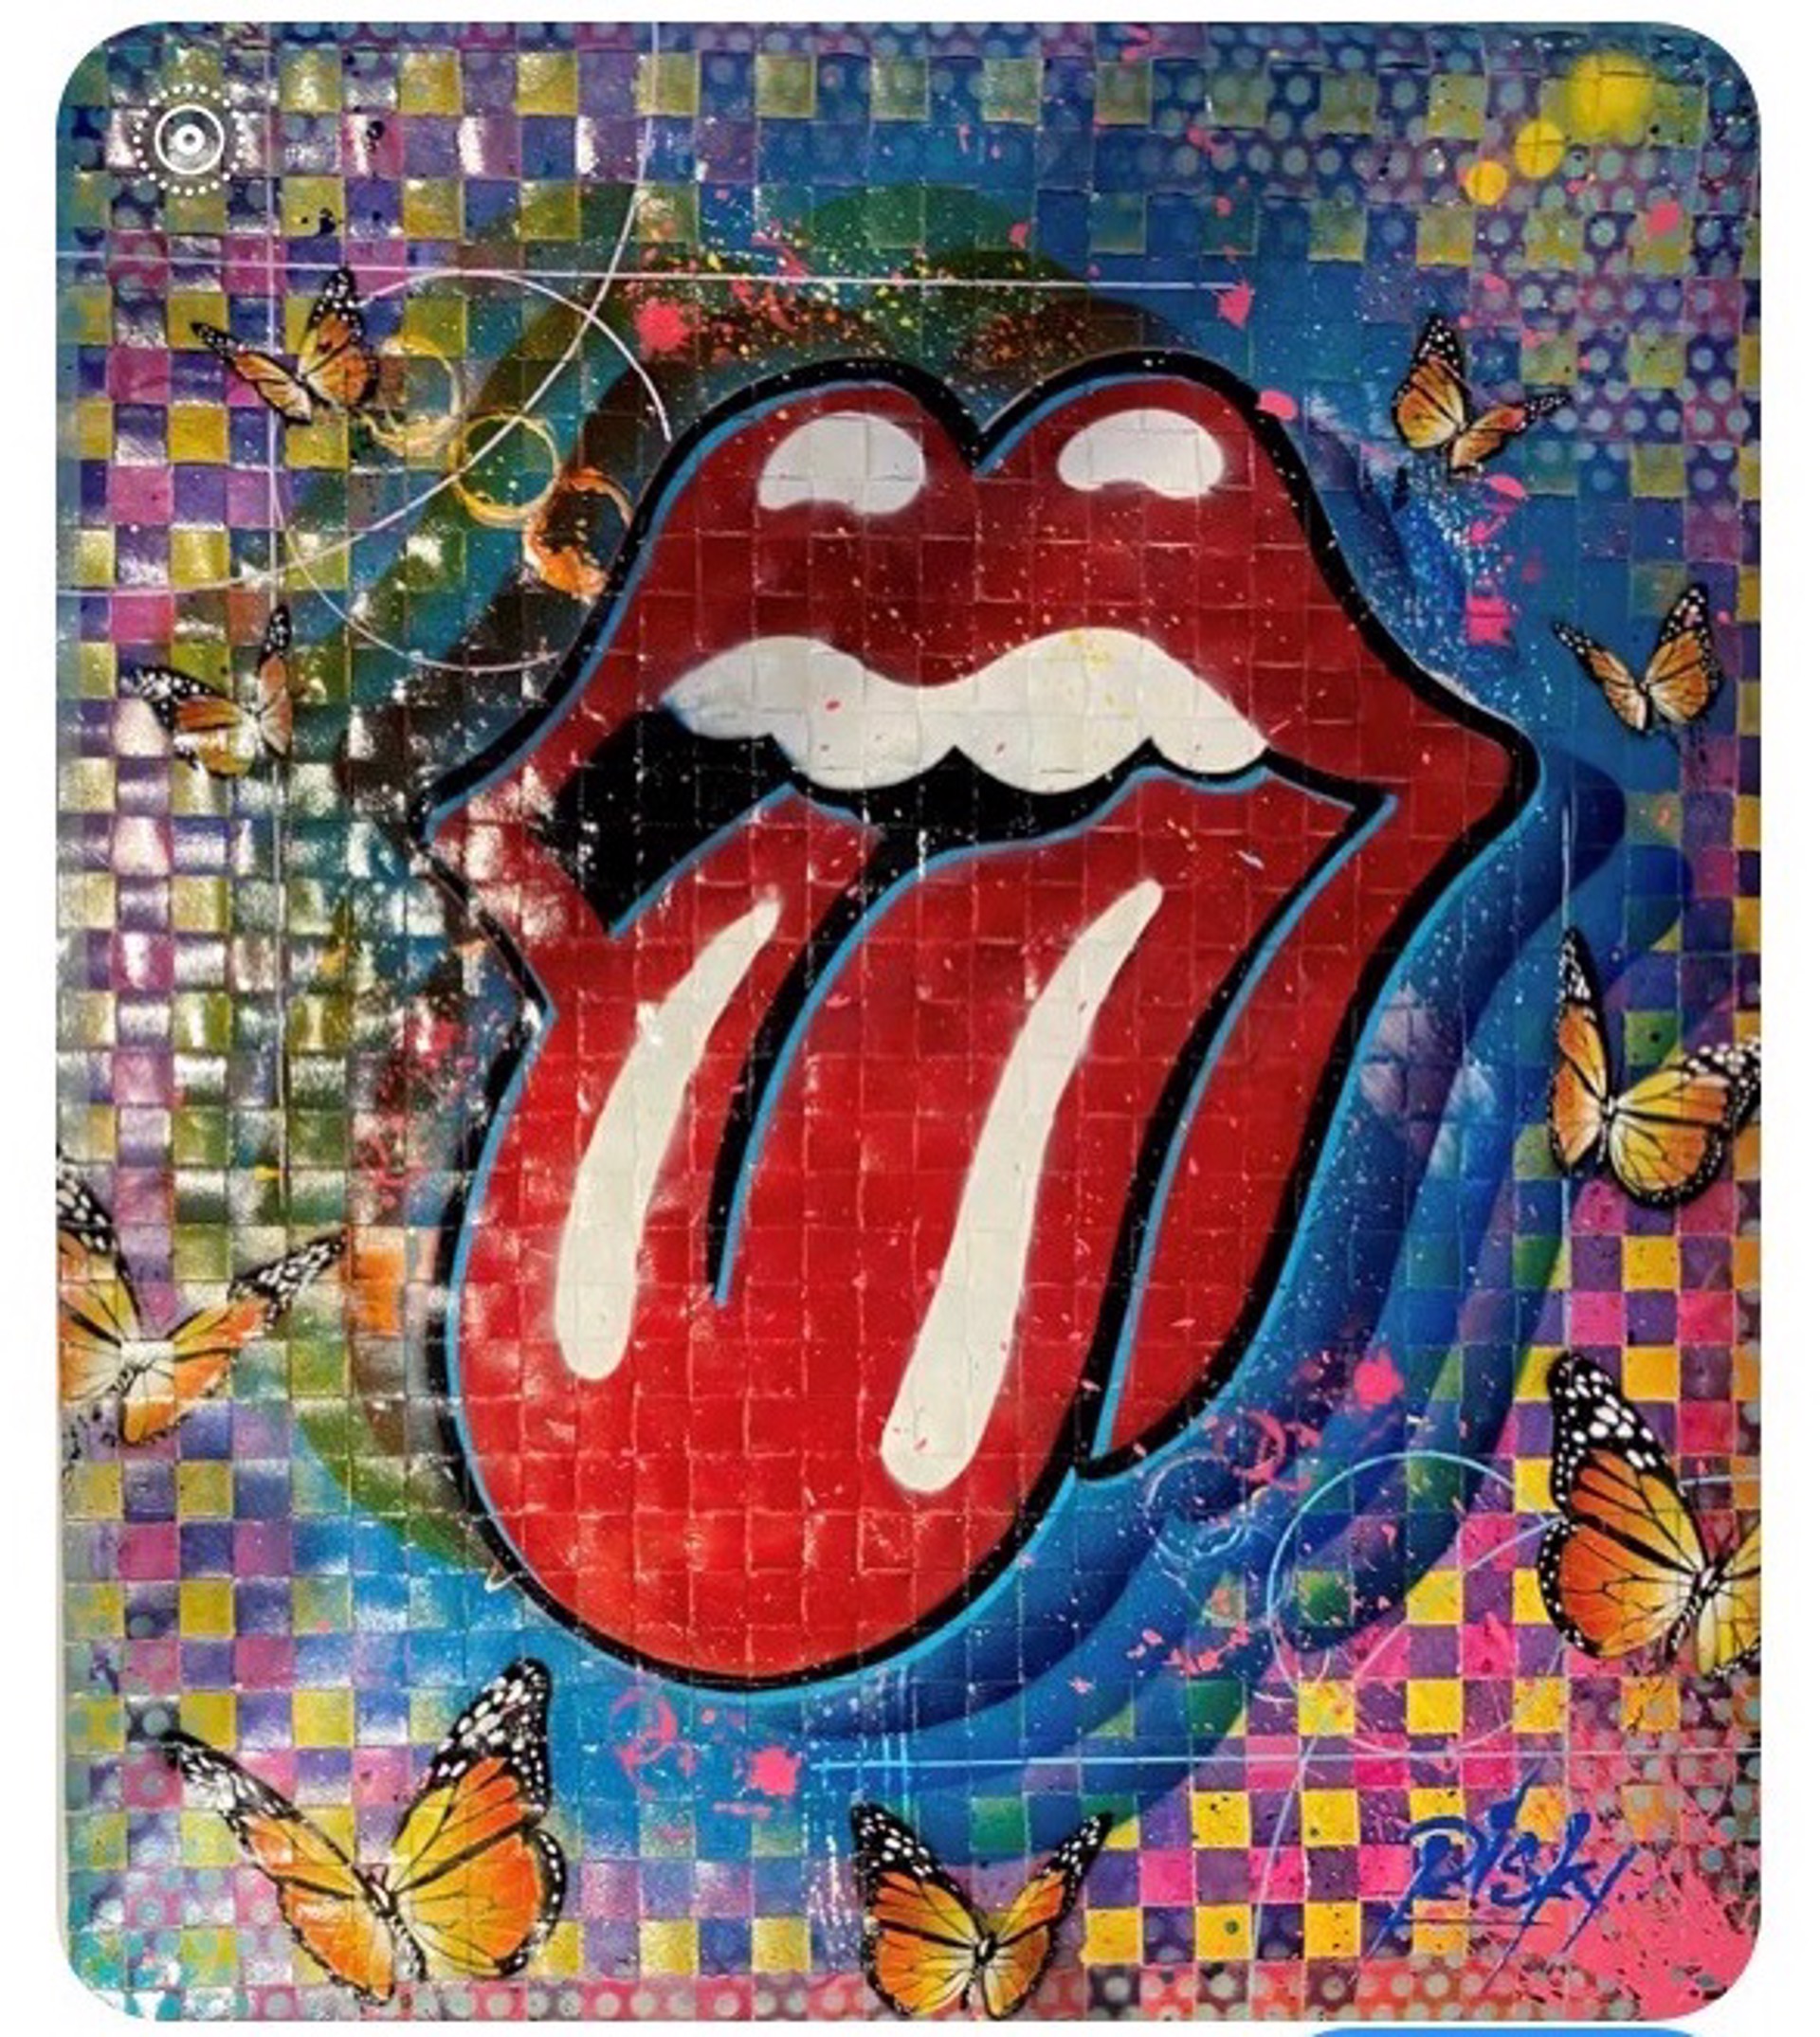 Rolling Stones by Risk